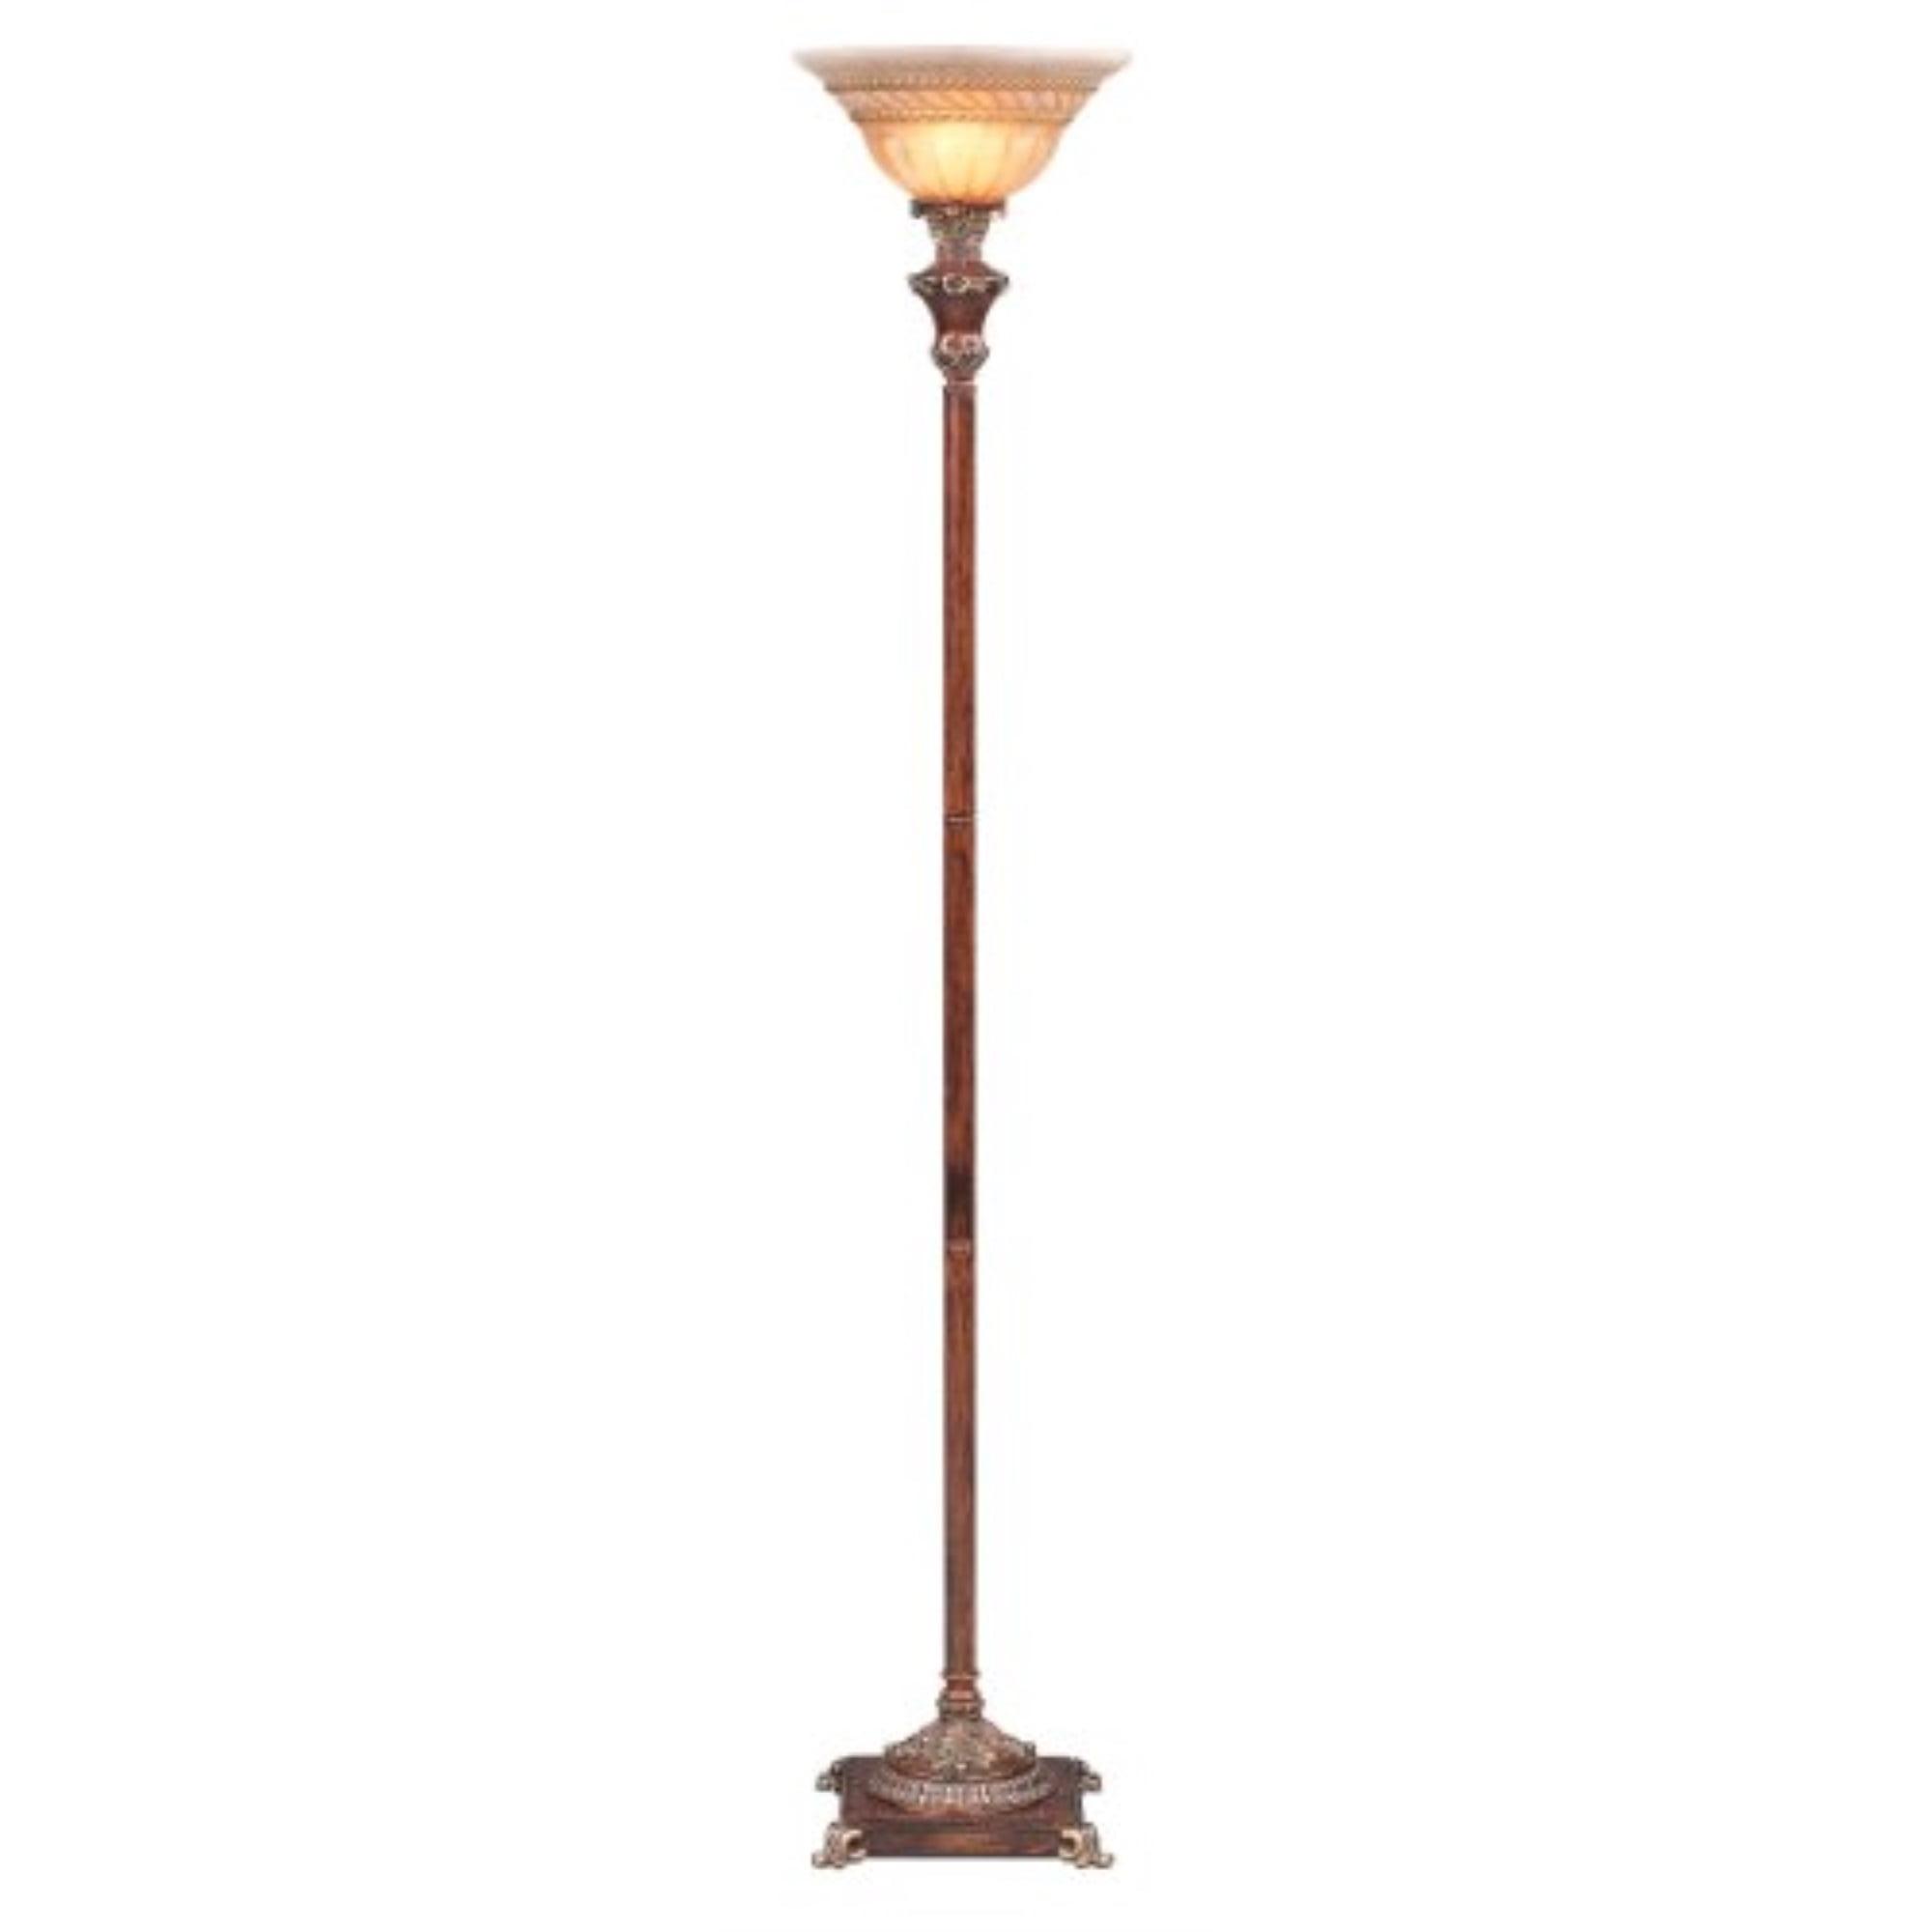 Elegant Black Torchiere Floor Lamp with USB and Wood Accents